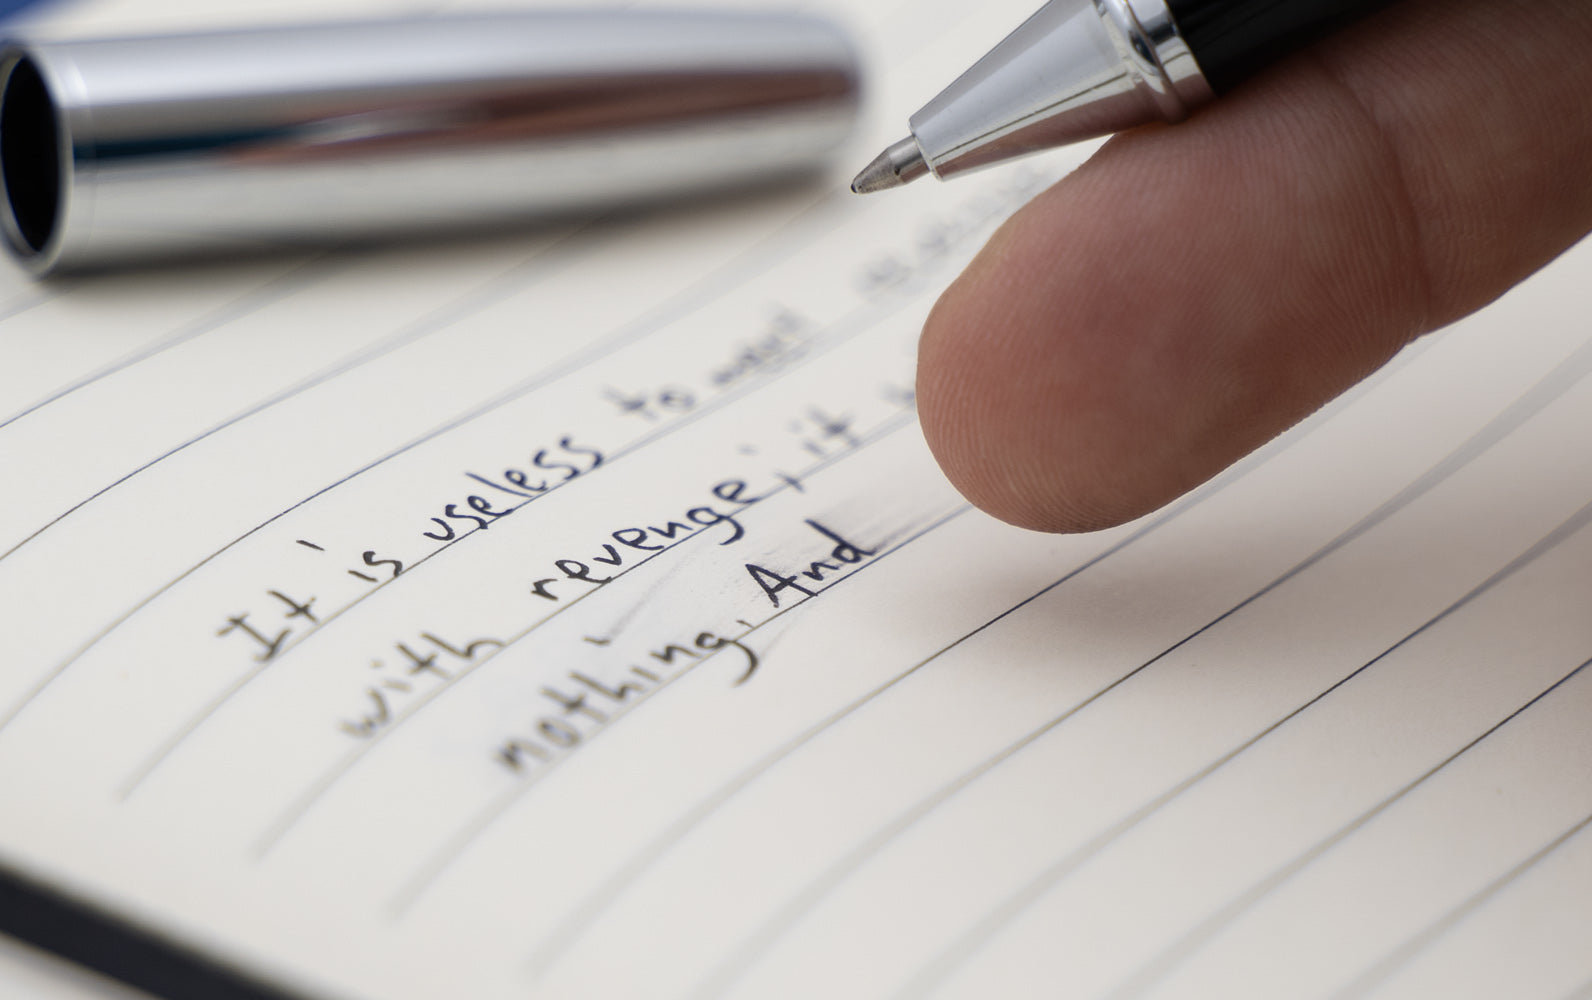 Best Pen for Good Handwriting: Unlock Your Writing Potential